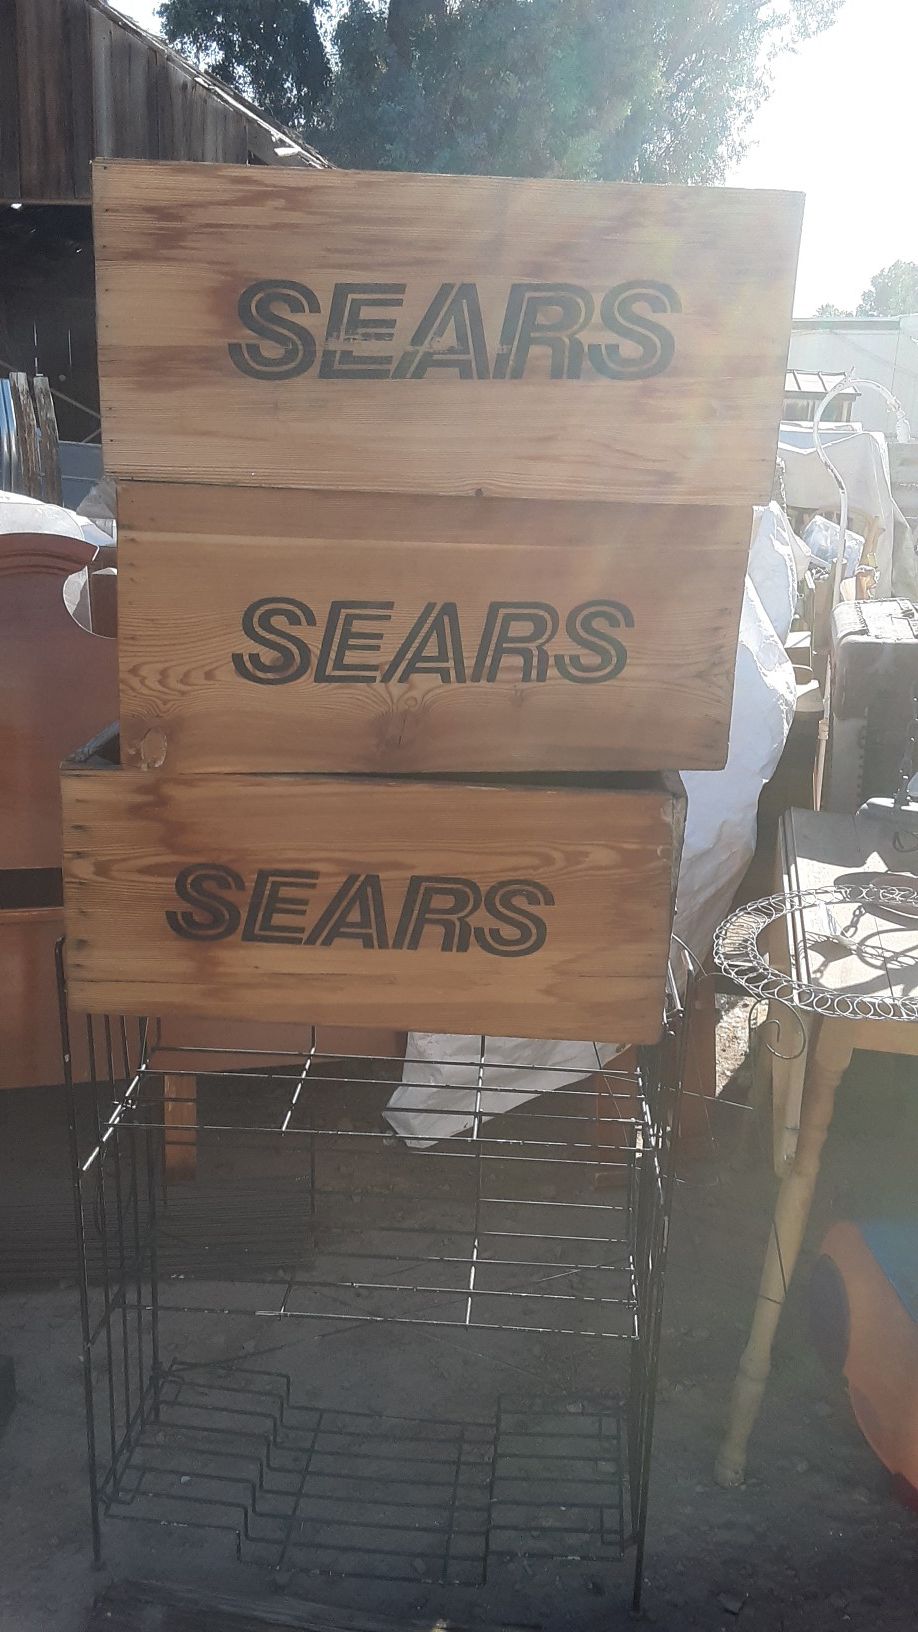 Collectable Sears wooden medium to large size cretes or boxes